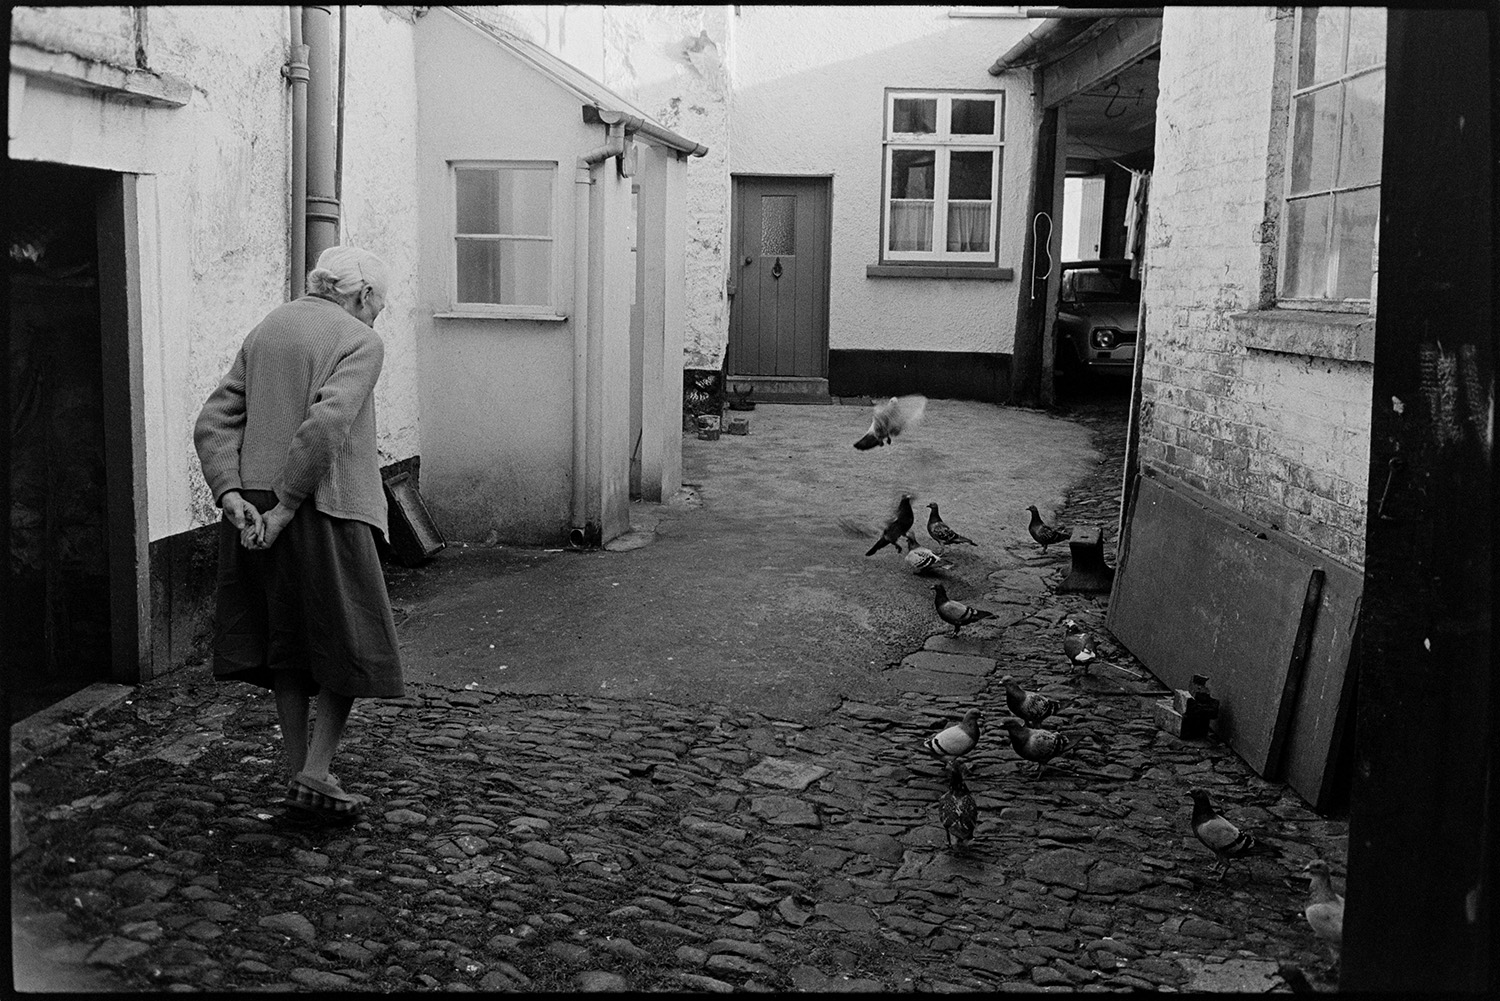 Doves, pigeons in courtyard.<br />
[Elderly lady walking in a cobbled courtyard at the rear entrance to a house in Hatherleigh, with doves and pigeons on the ground. ]